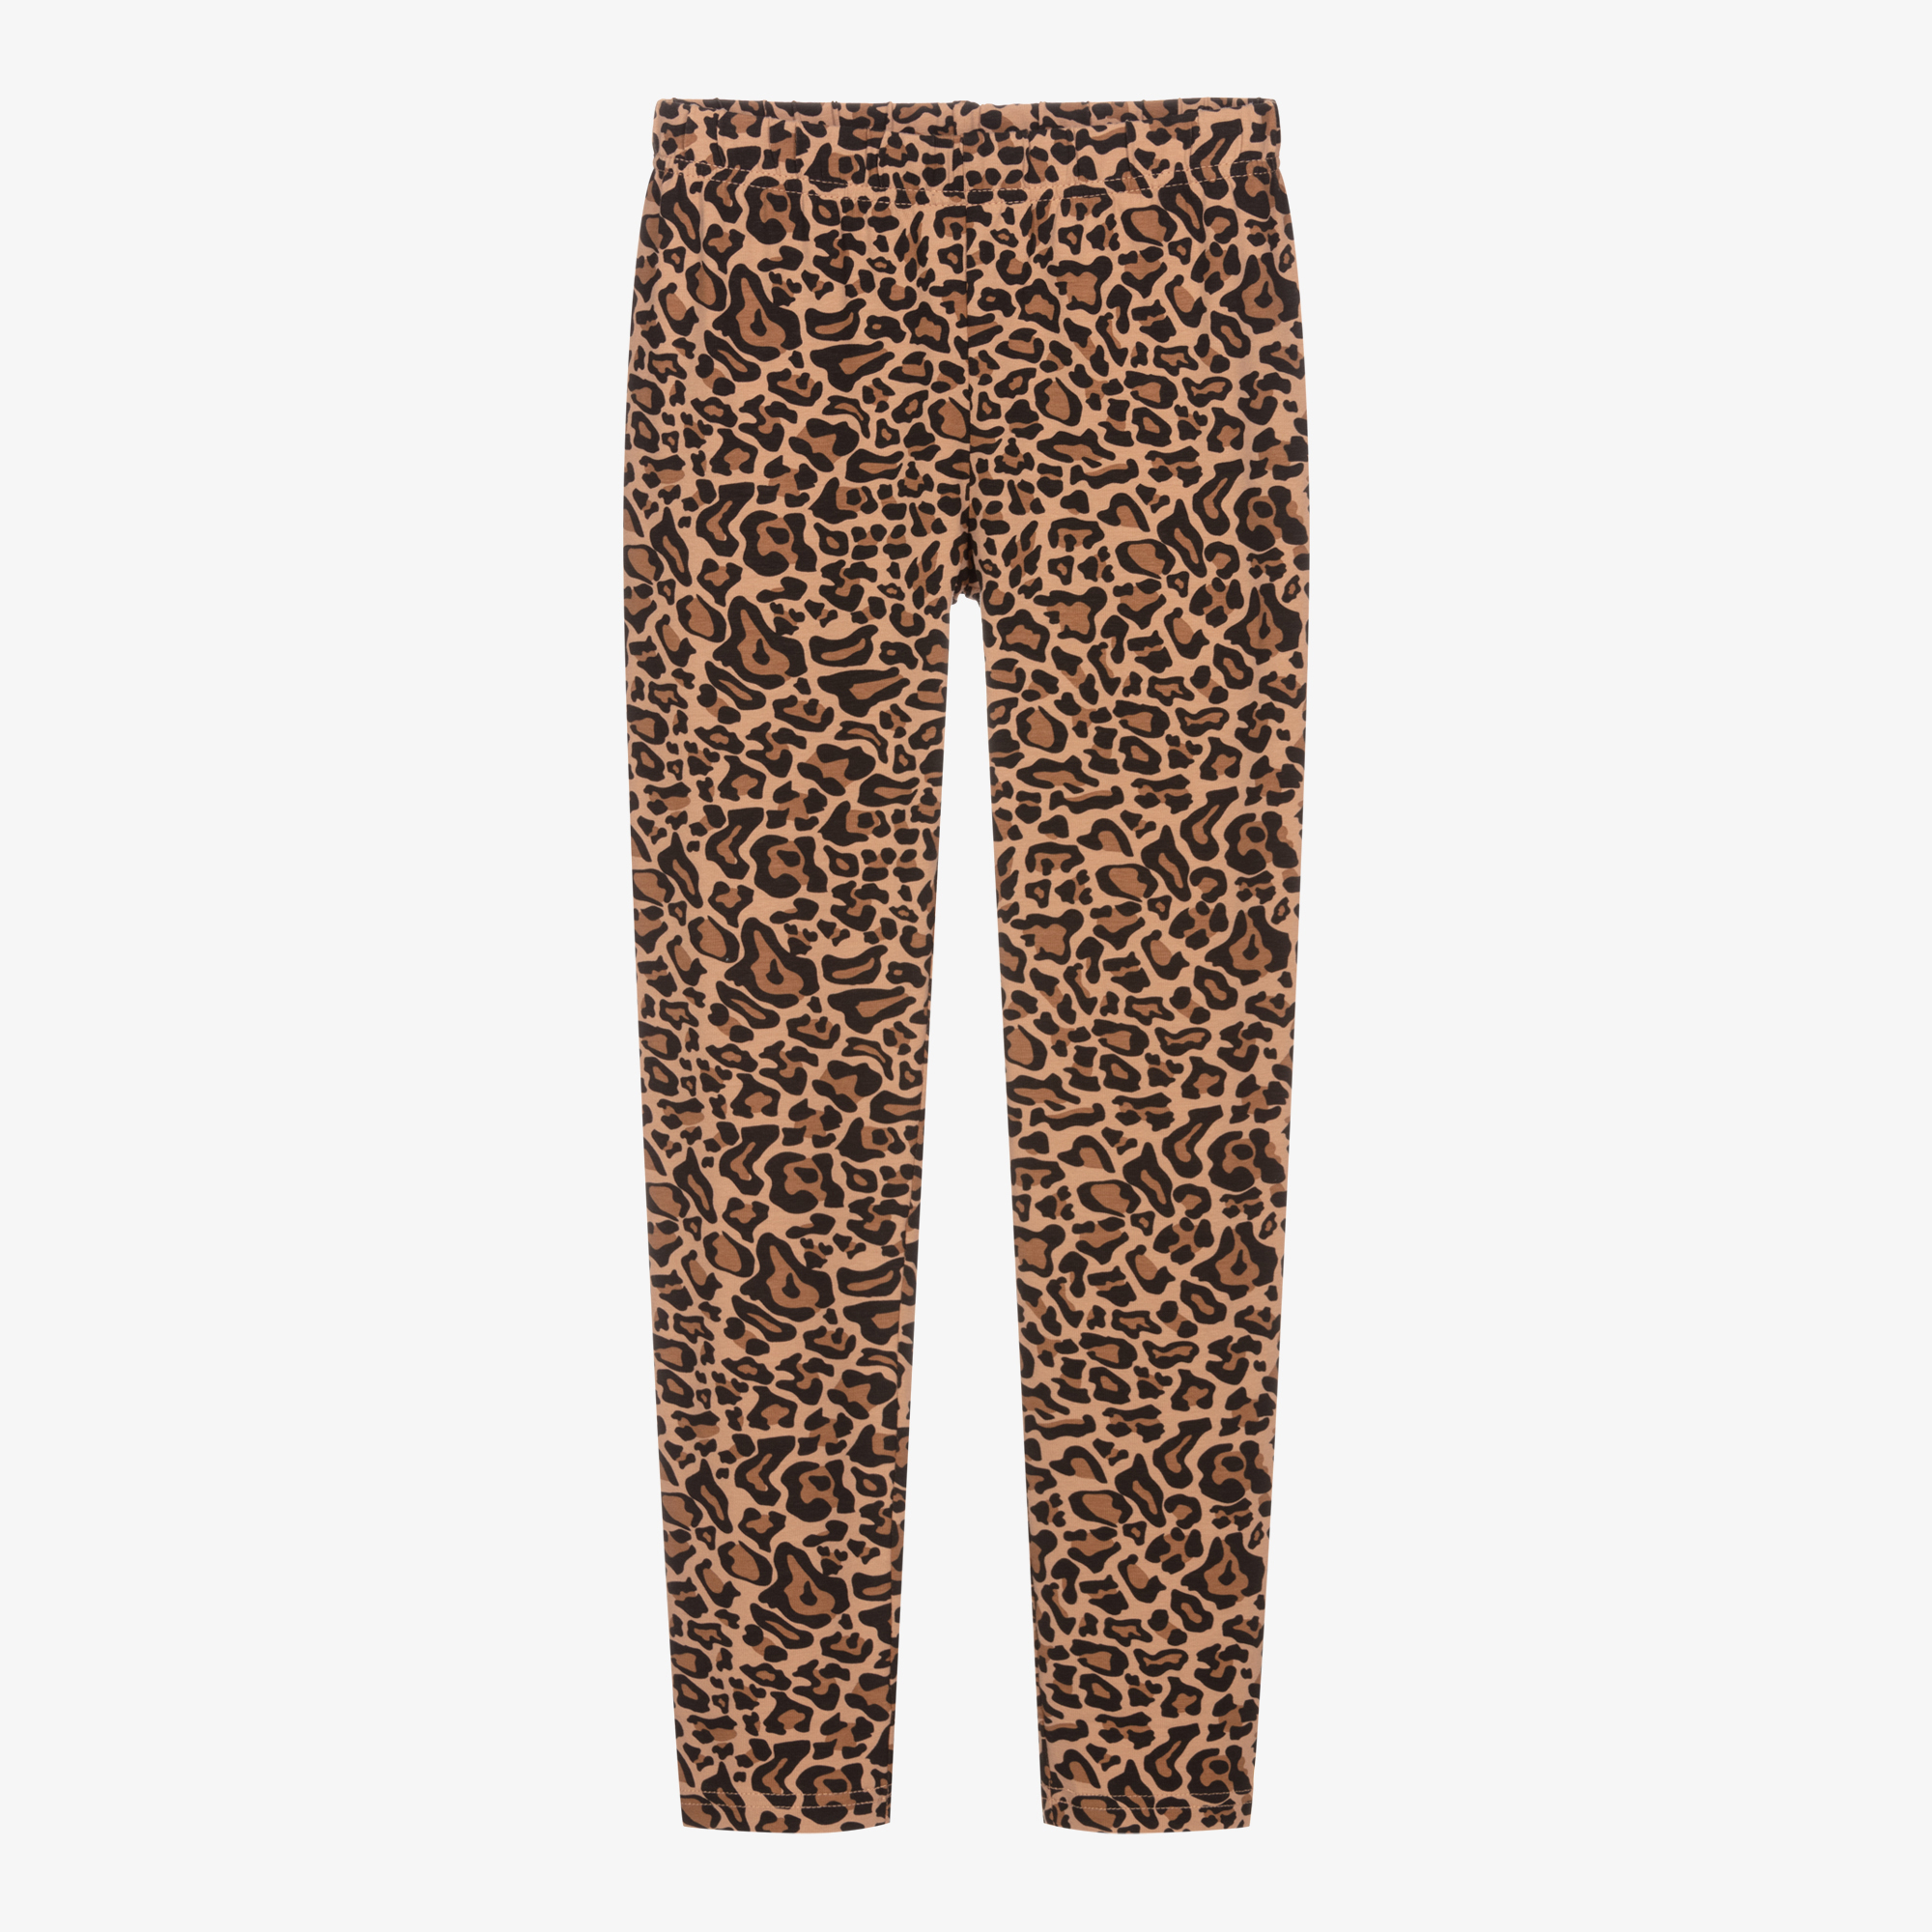 iDO leopard print leggings for girls from 8 to 16 years